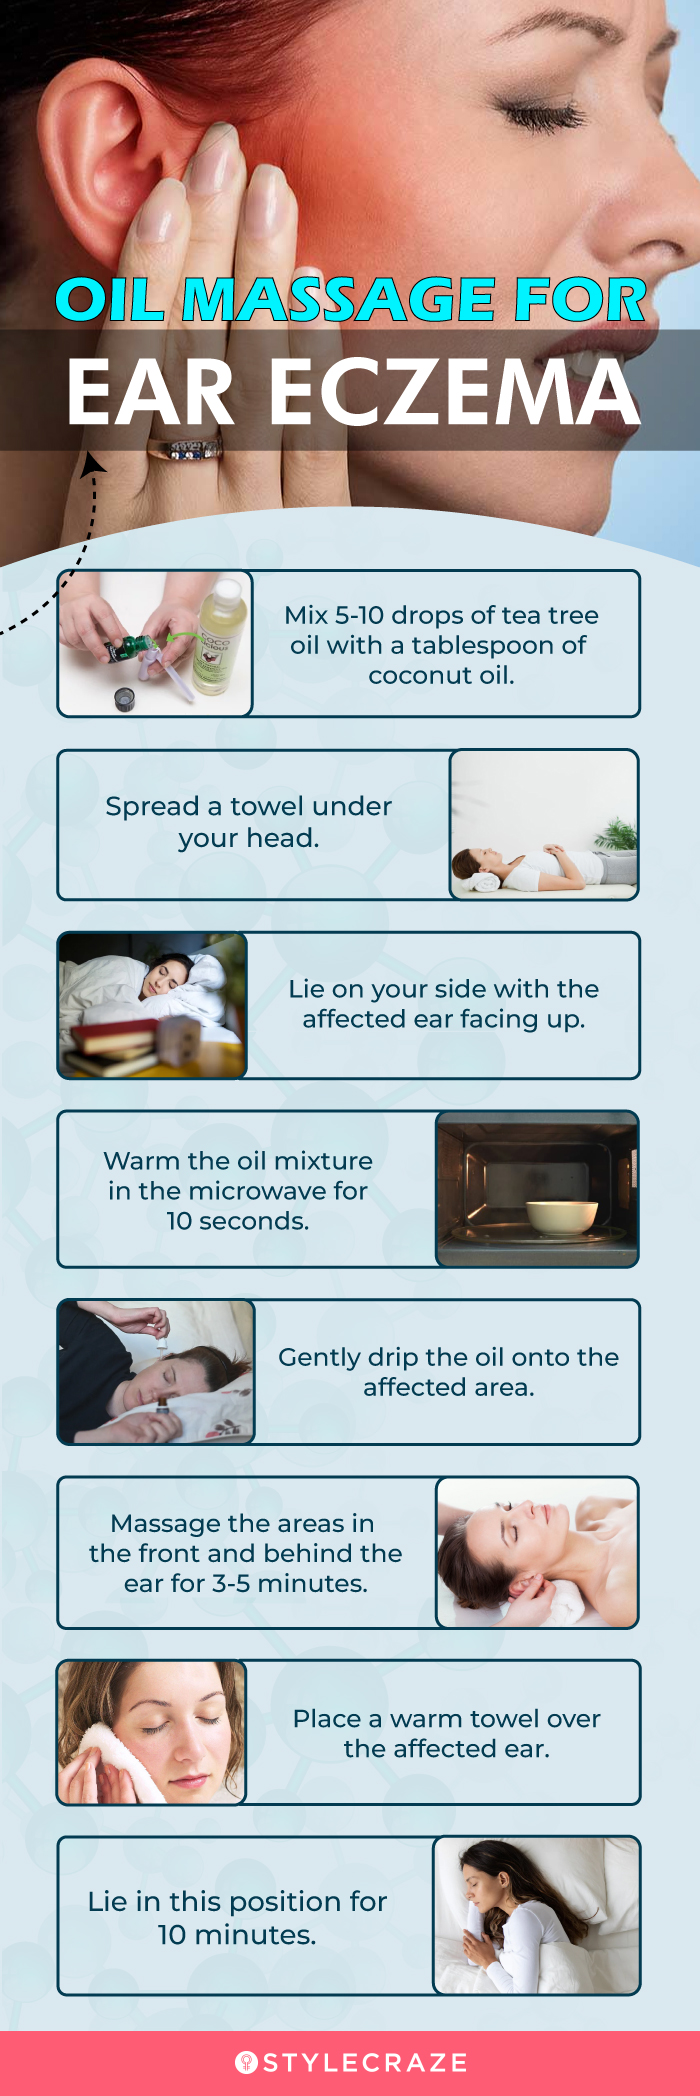 oil massage for ear eczema [infographic]